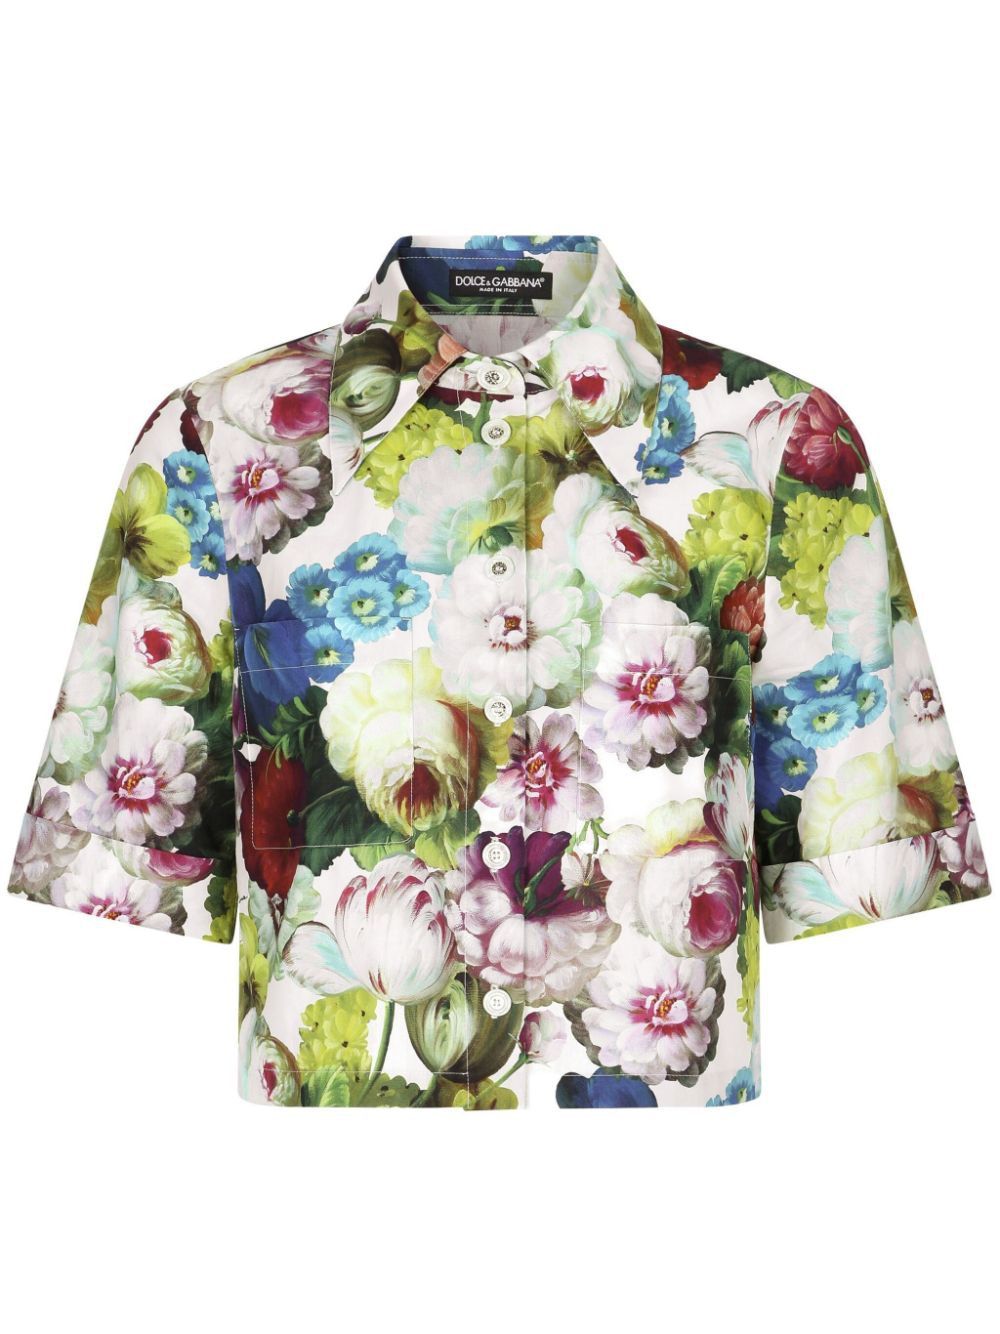 DOLCE & GABBANA Floral Printed Cotton Shirt for Women - Multicolored SSC